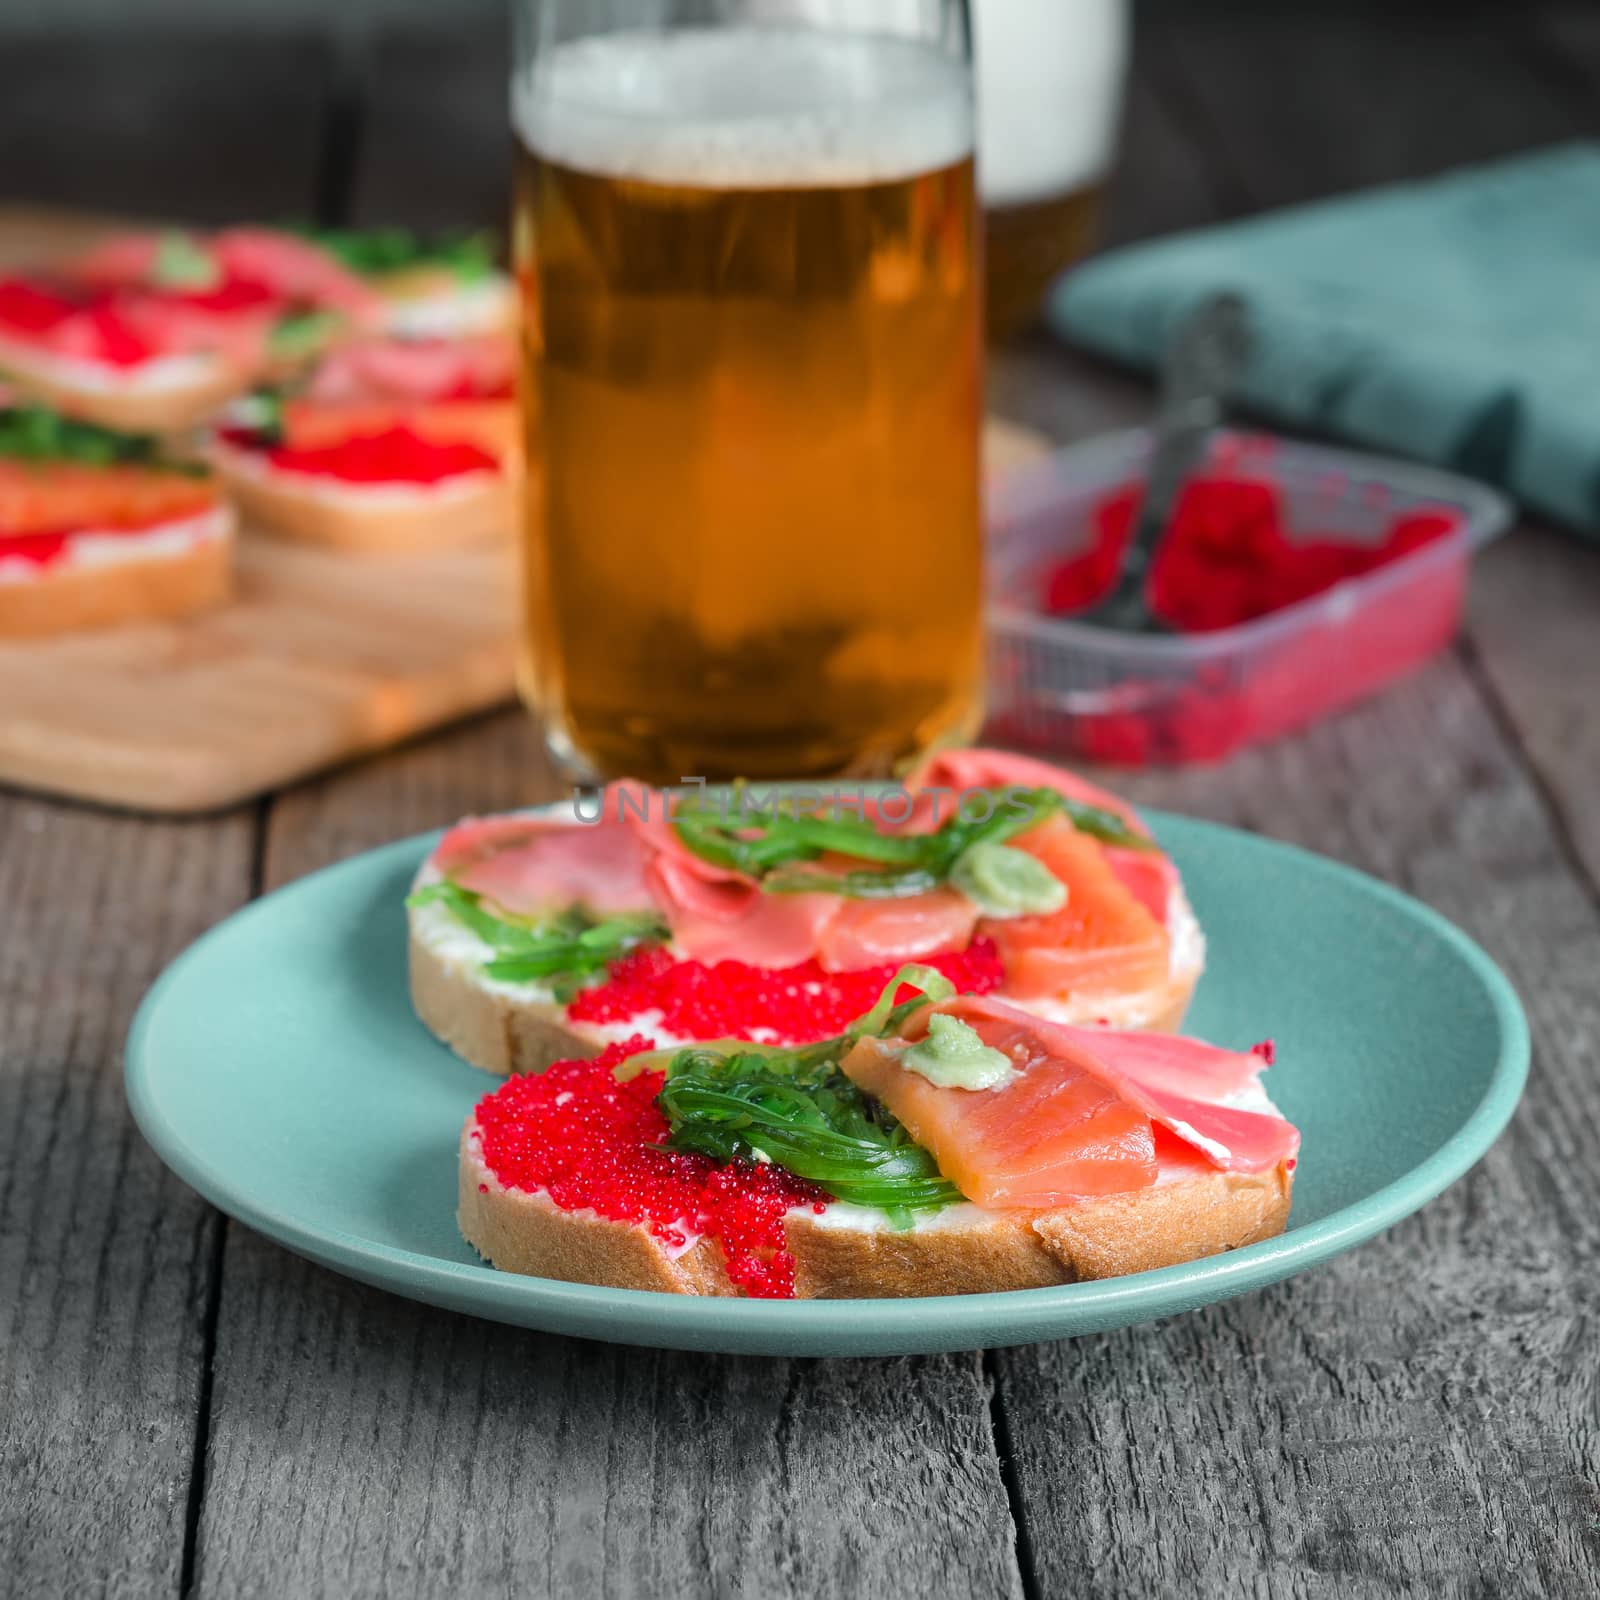 Sandwiches with seafood and beer in the background. Grey background, standing on old wooden surface.